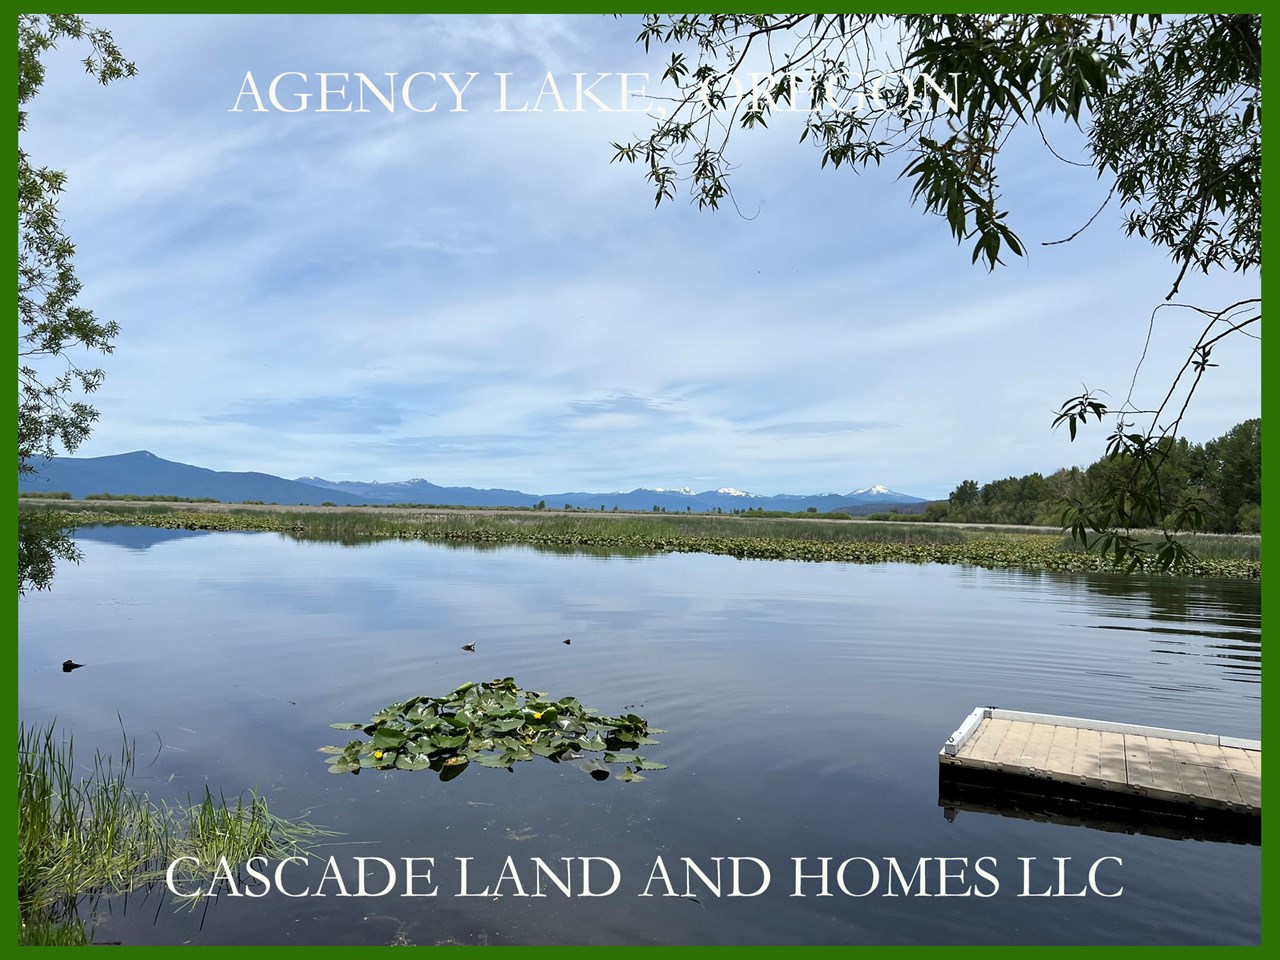 agency lake is on the pacific flyway where you can often see bald eagles, sandhill cranes, and over 400 species of migratory birds! wildlife surrounds you here. the area is perfect for hiking, biking, horseback riding, fishing, flyfishing, boating, wildlife and birdwatching and anything else that gets you outdoors. 
